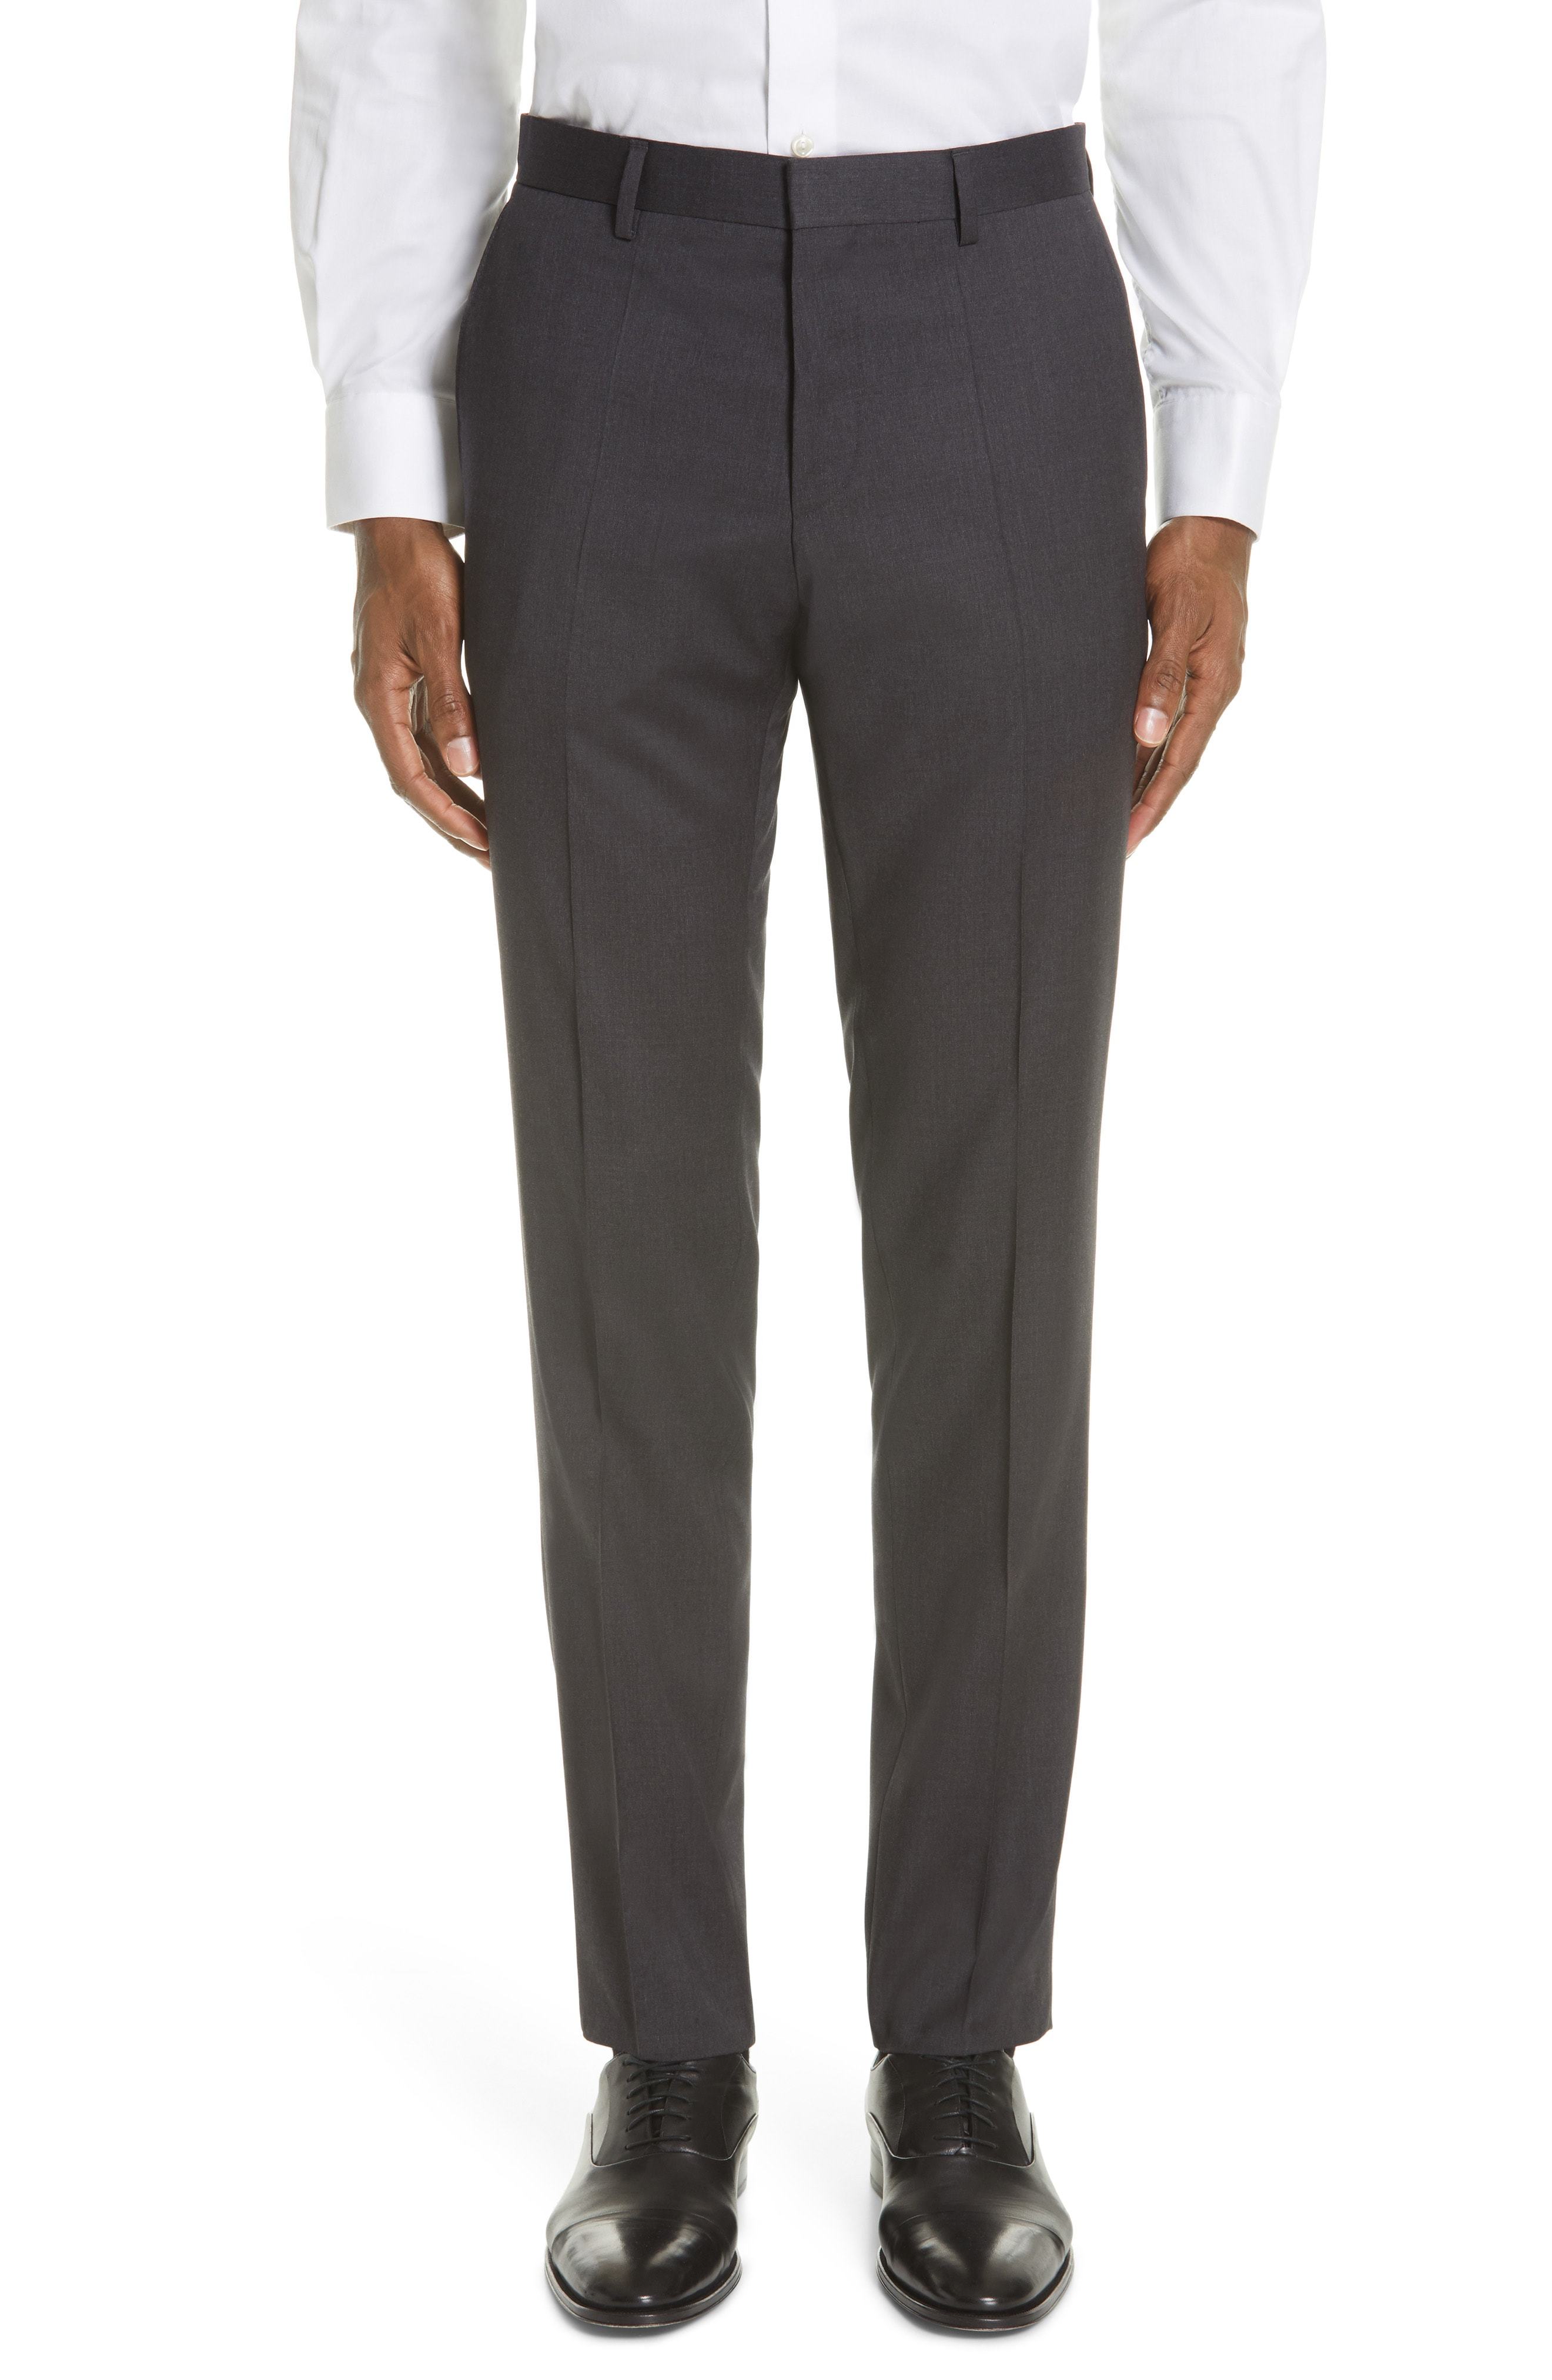 Buy Joules Charcoal Grey Wool Slim Fit Suit: Trousers from Next Netherlands